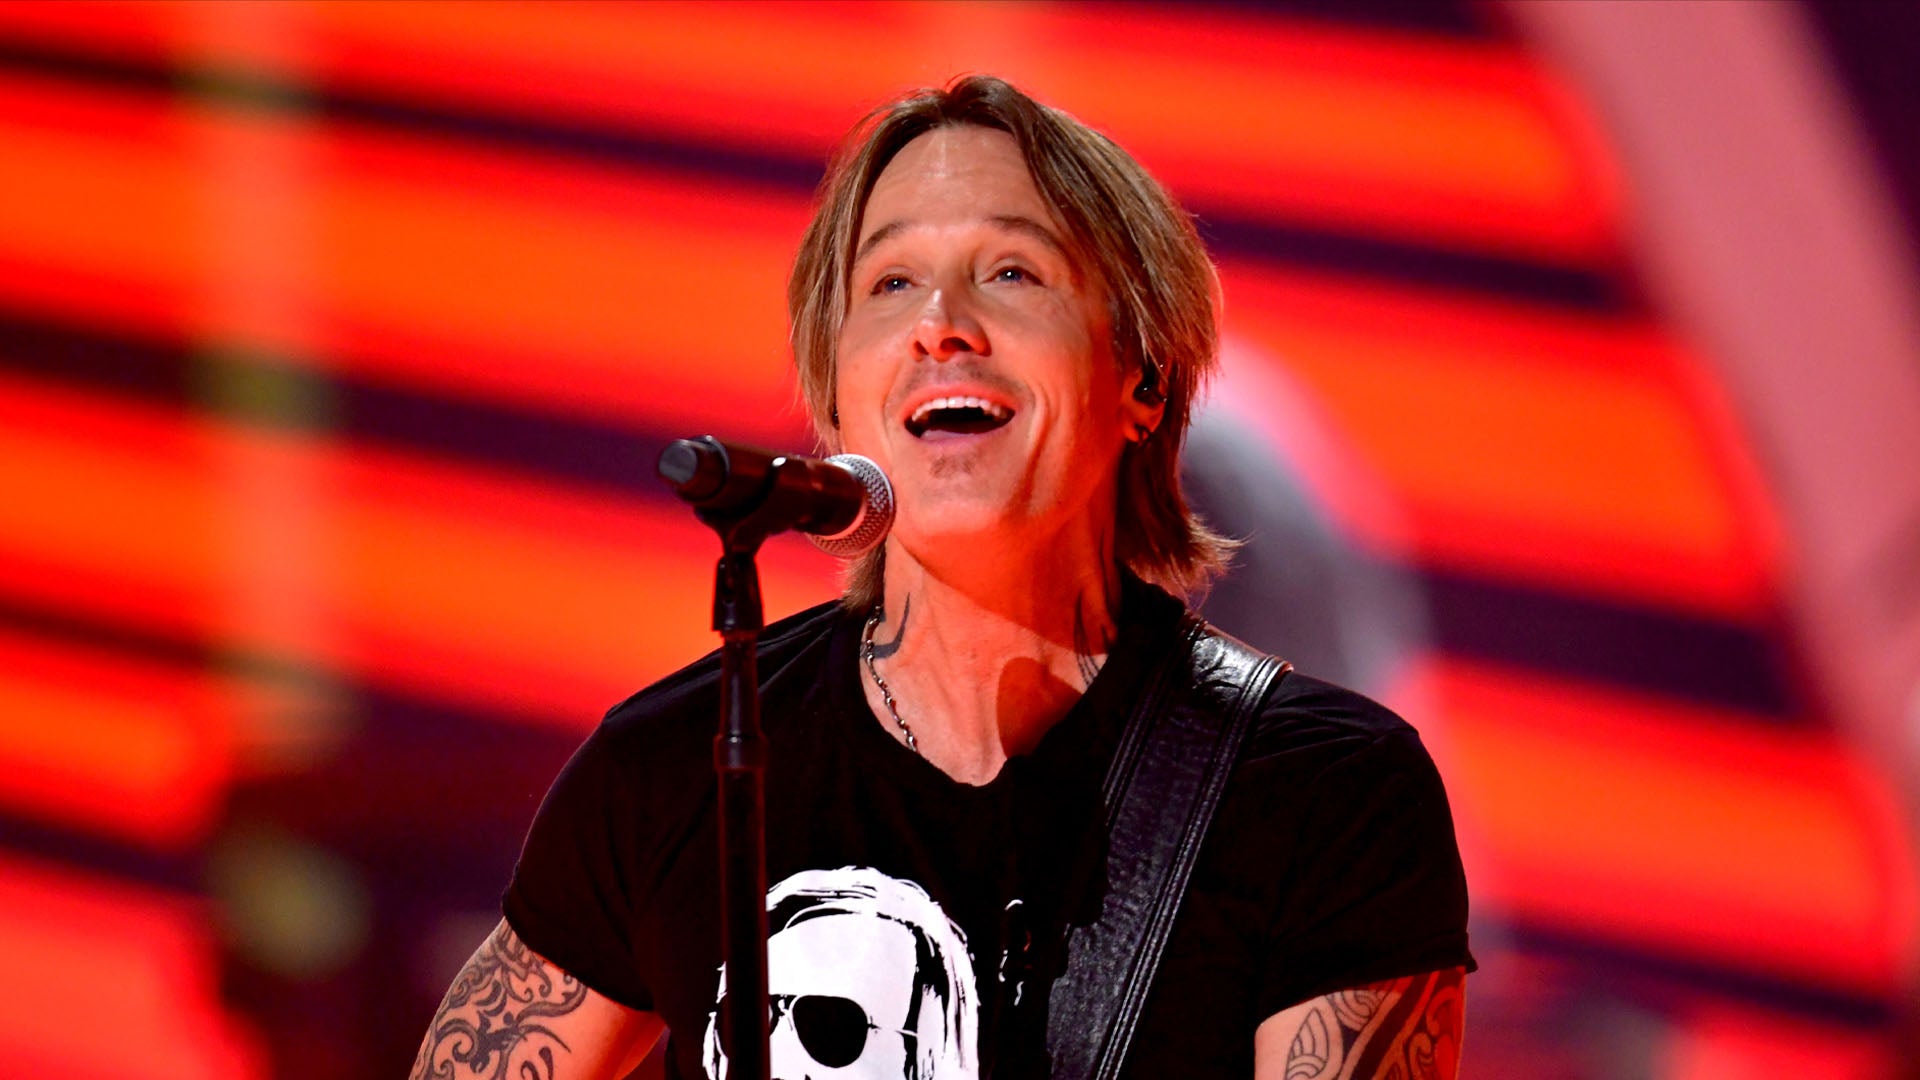 Keith Urban Makes History With 'Straight Line' Performance at CMT Music Awards